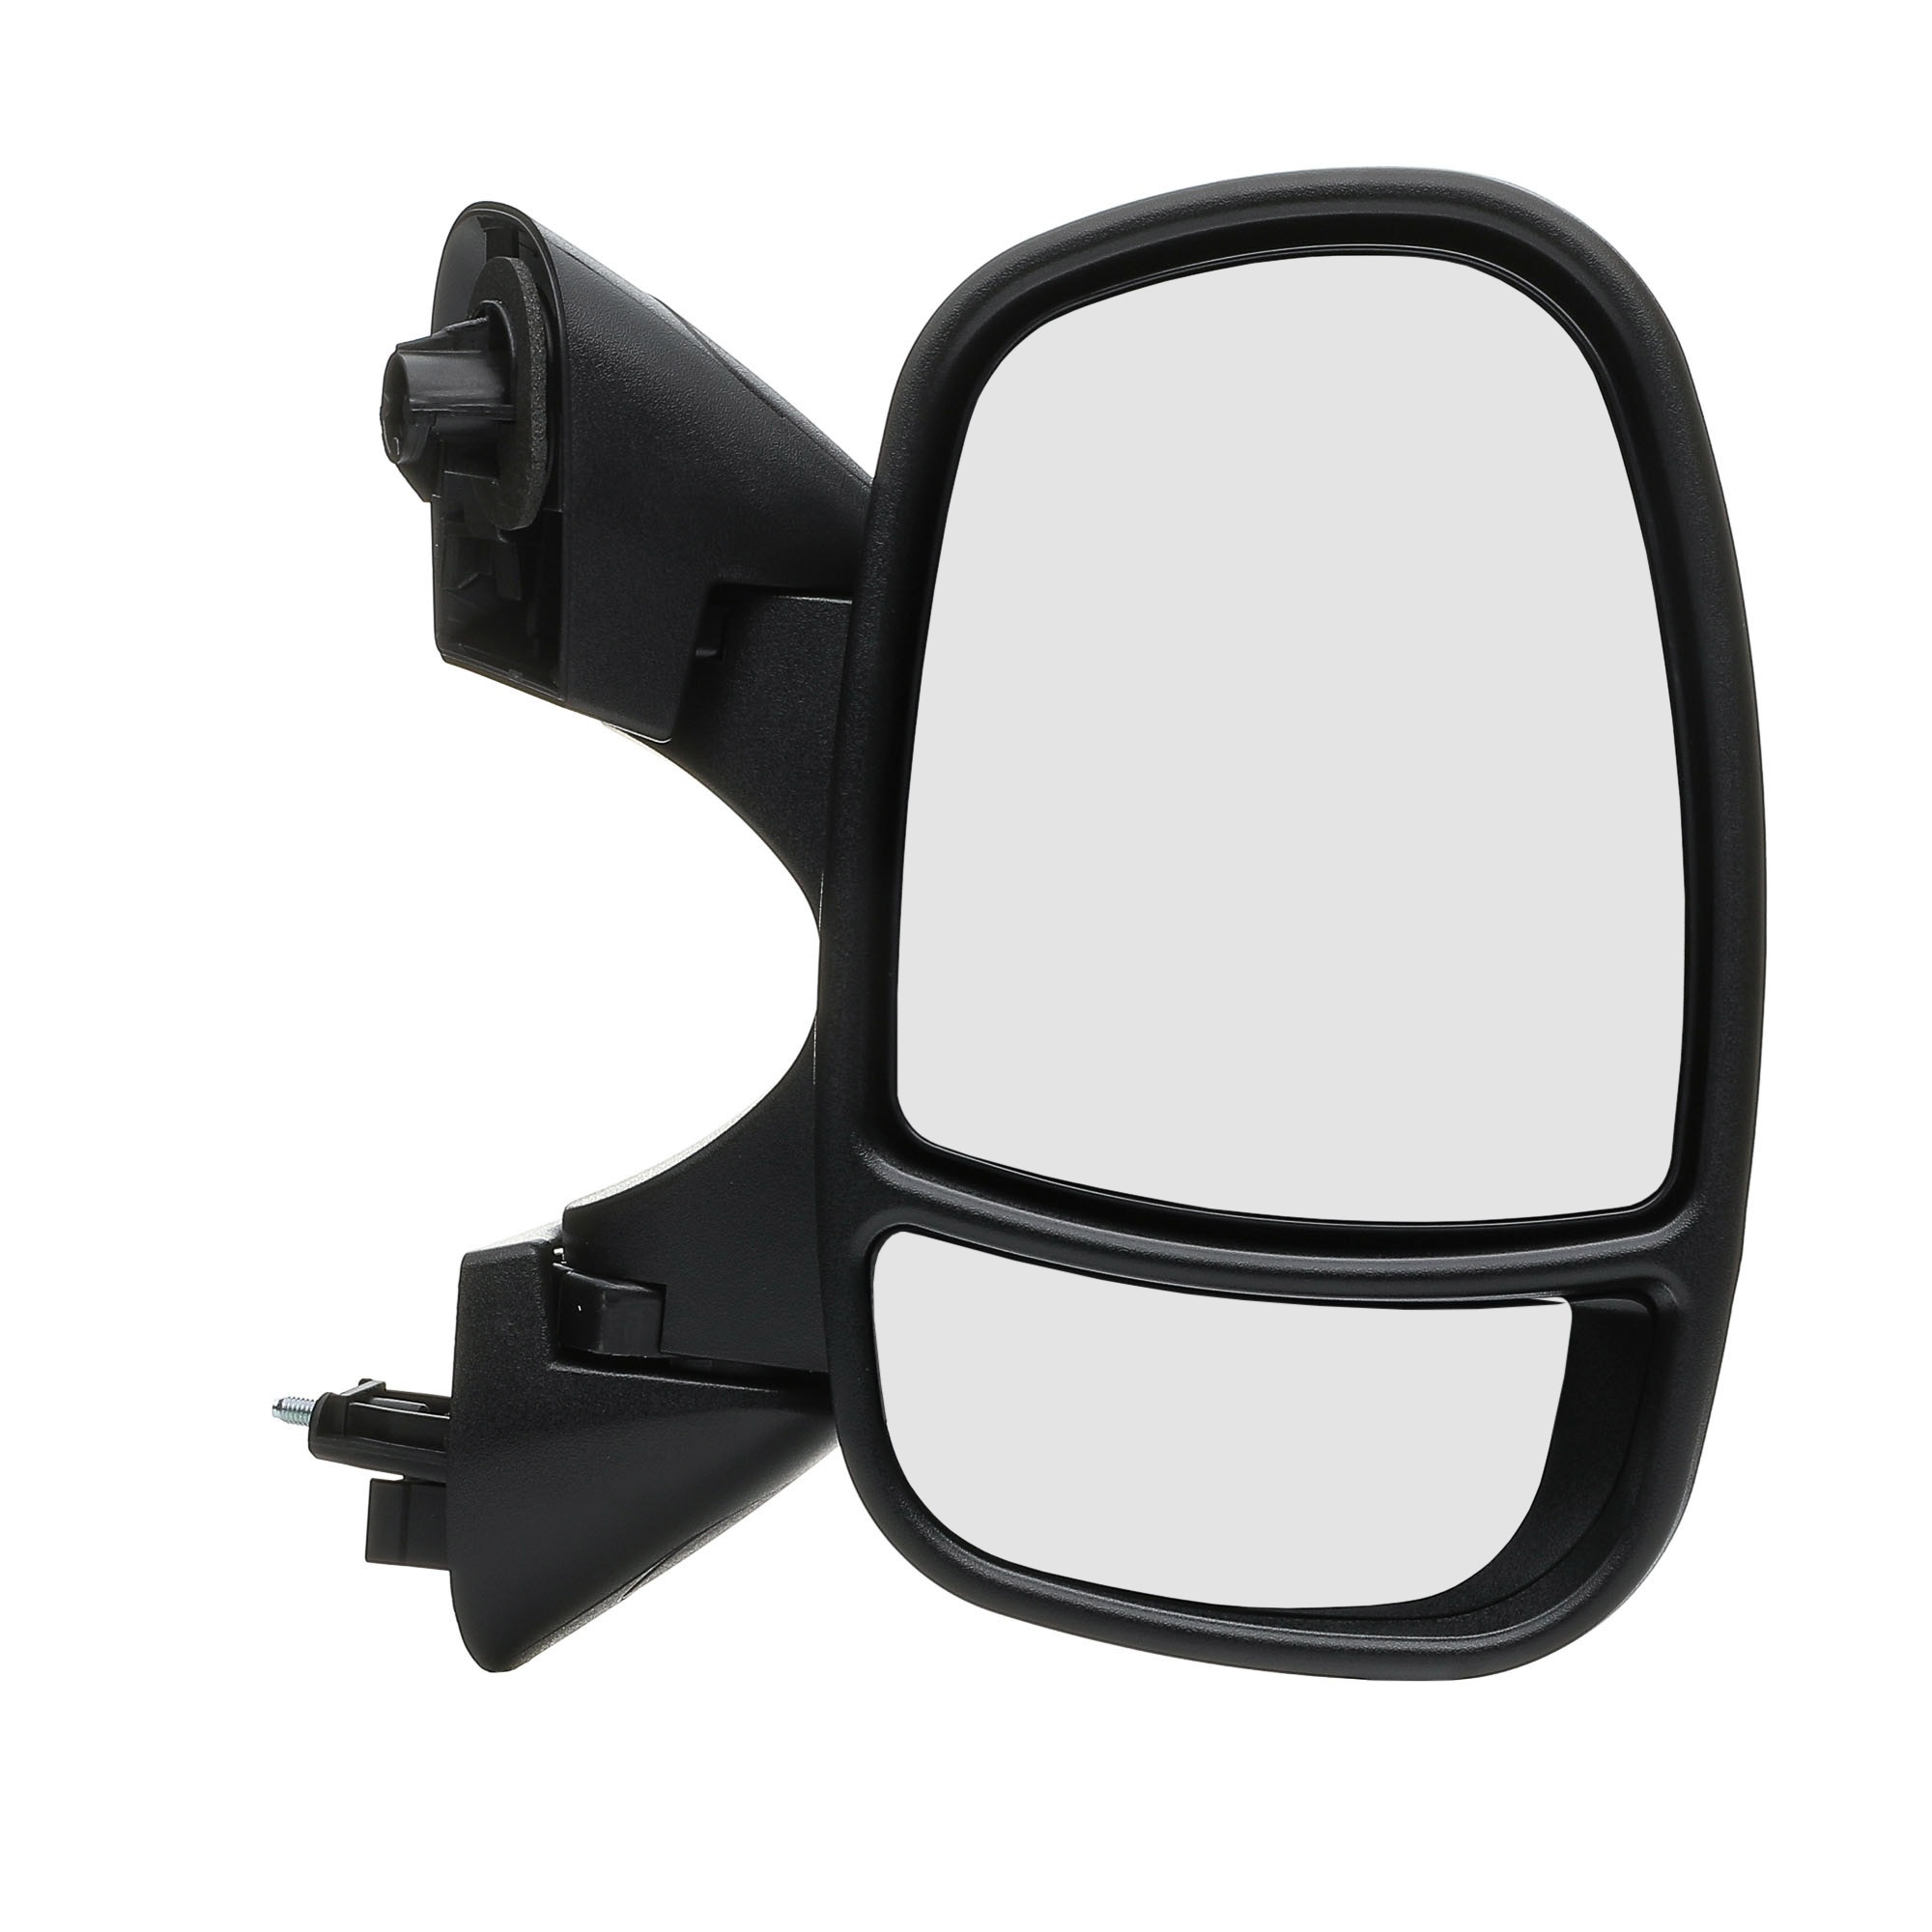 STARK SKOM-1040399 Wing mirror Right, black, for electric mirror adjustment, Convex, Heatable, with thermo sensor, Short mirror arm